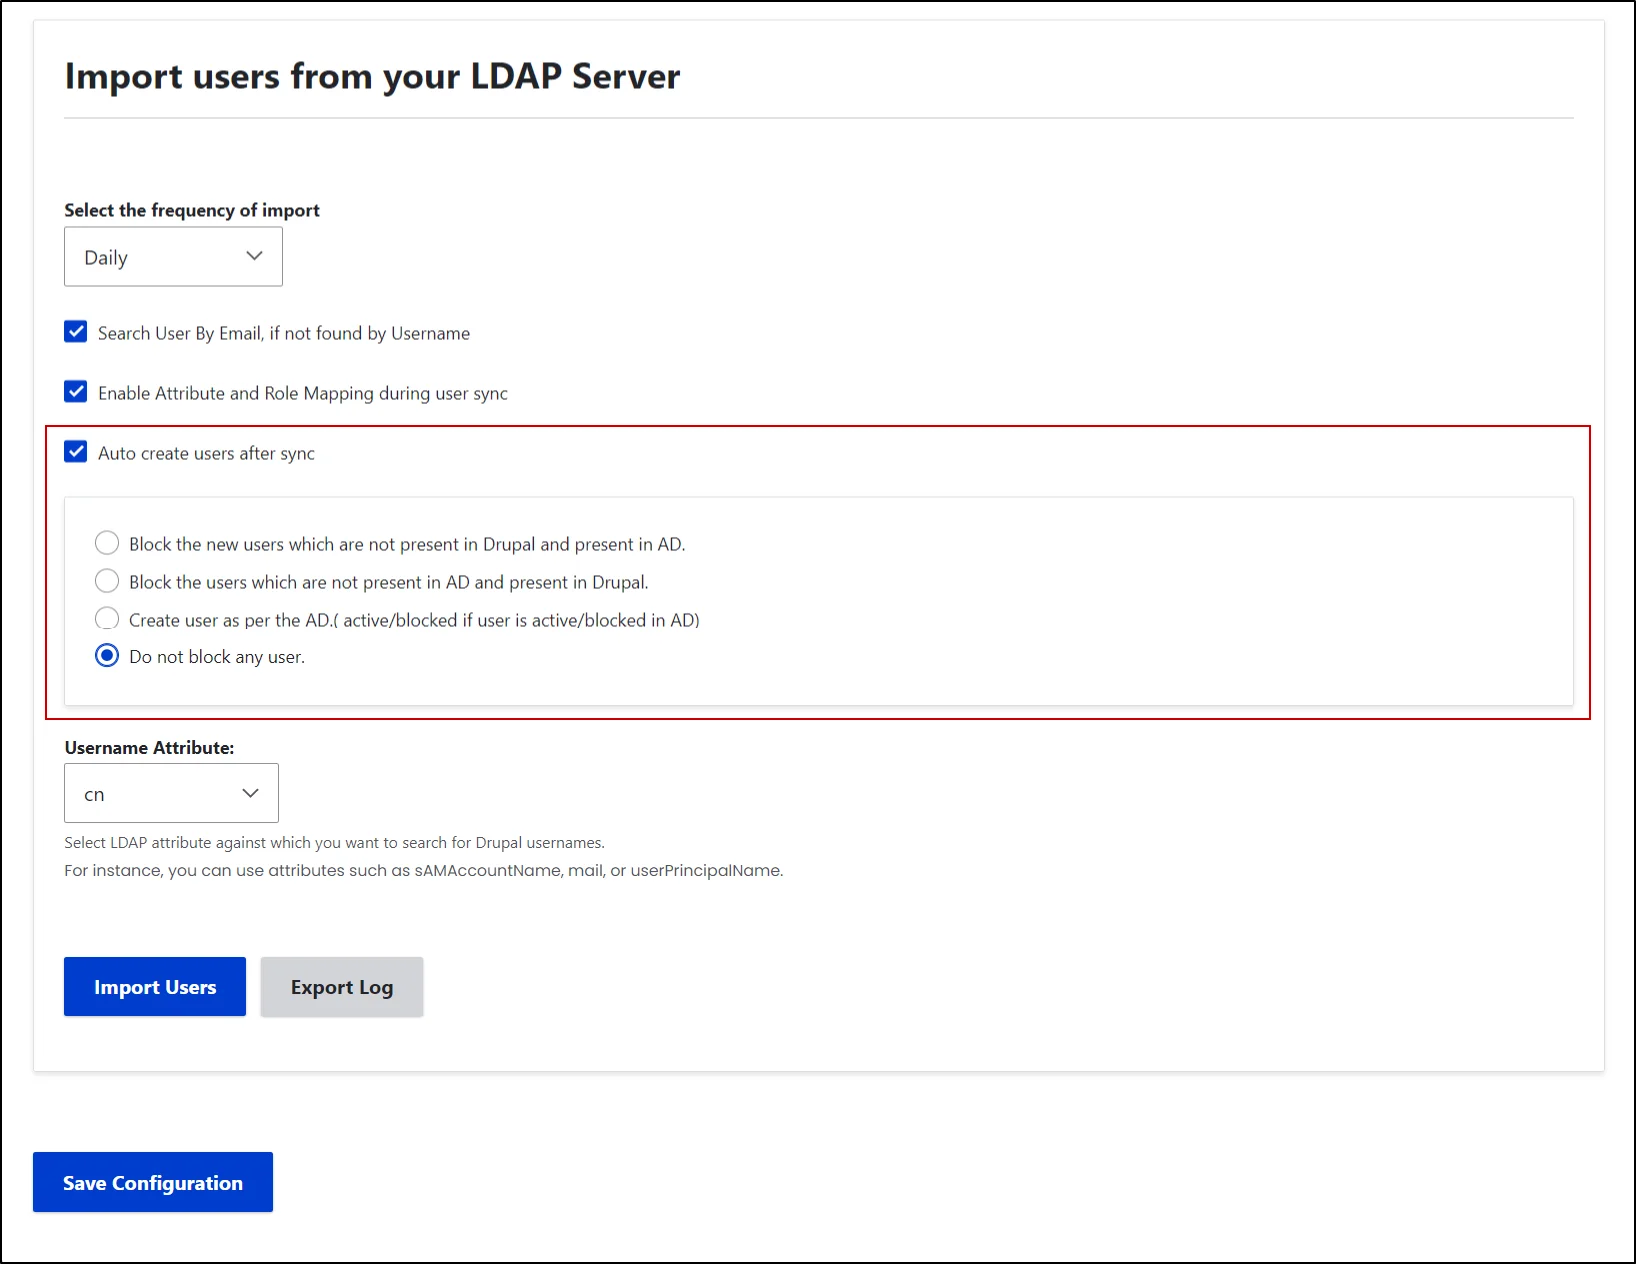 Import users from LDAP to Drupal - Select Auto-create users after sync